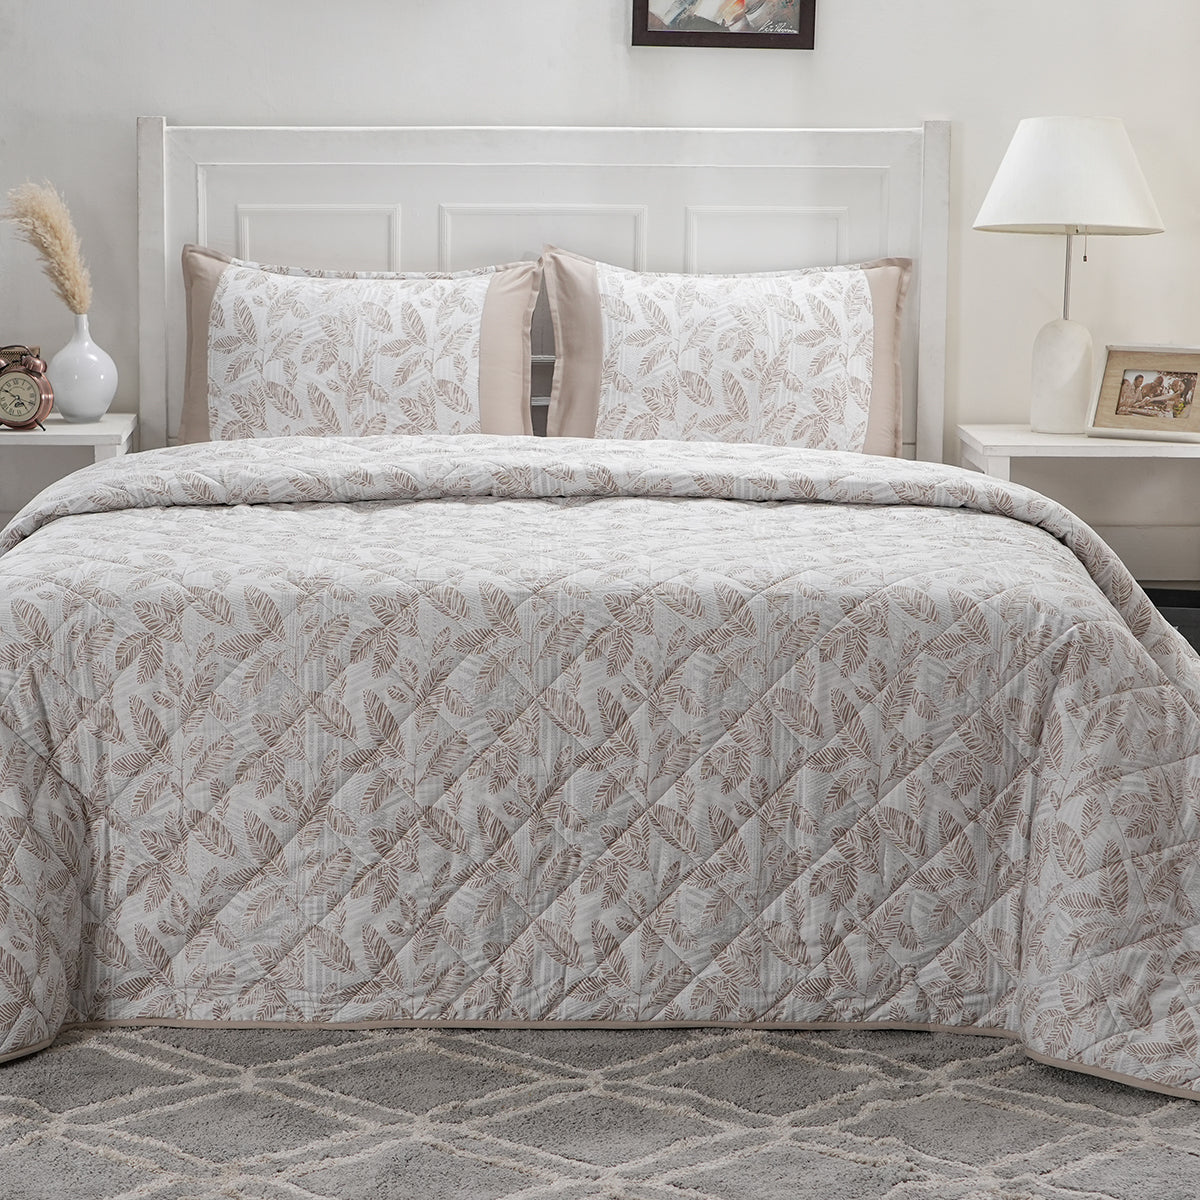 Optimist Bloom 115 GSM Tropical Texture Summer AC Quilt/Quilted Bed Cover/Comforter